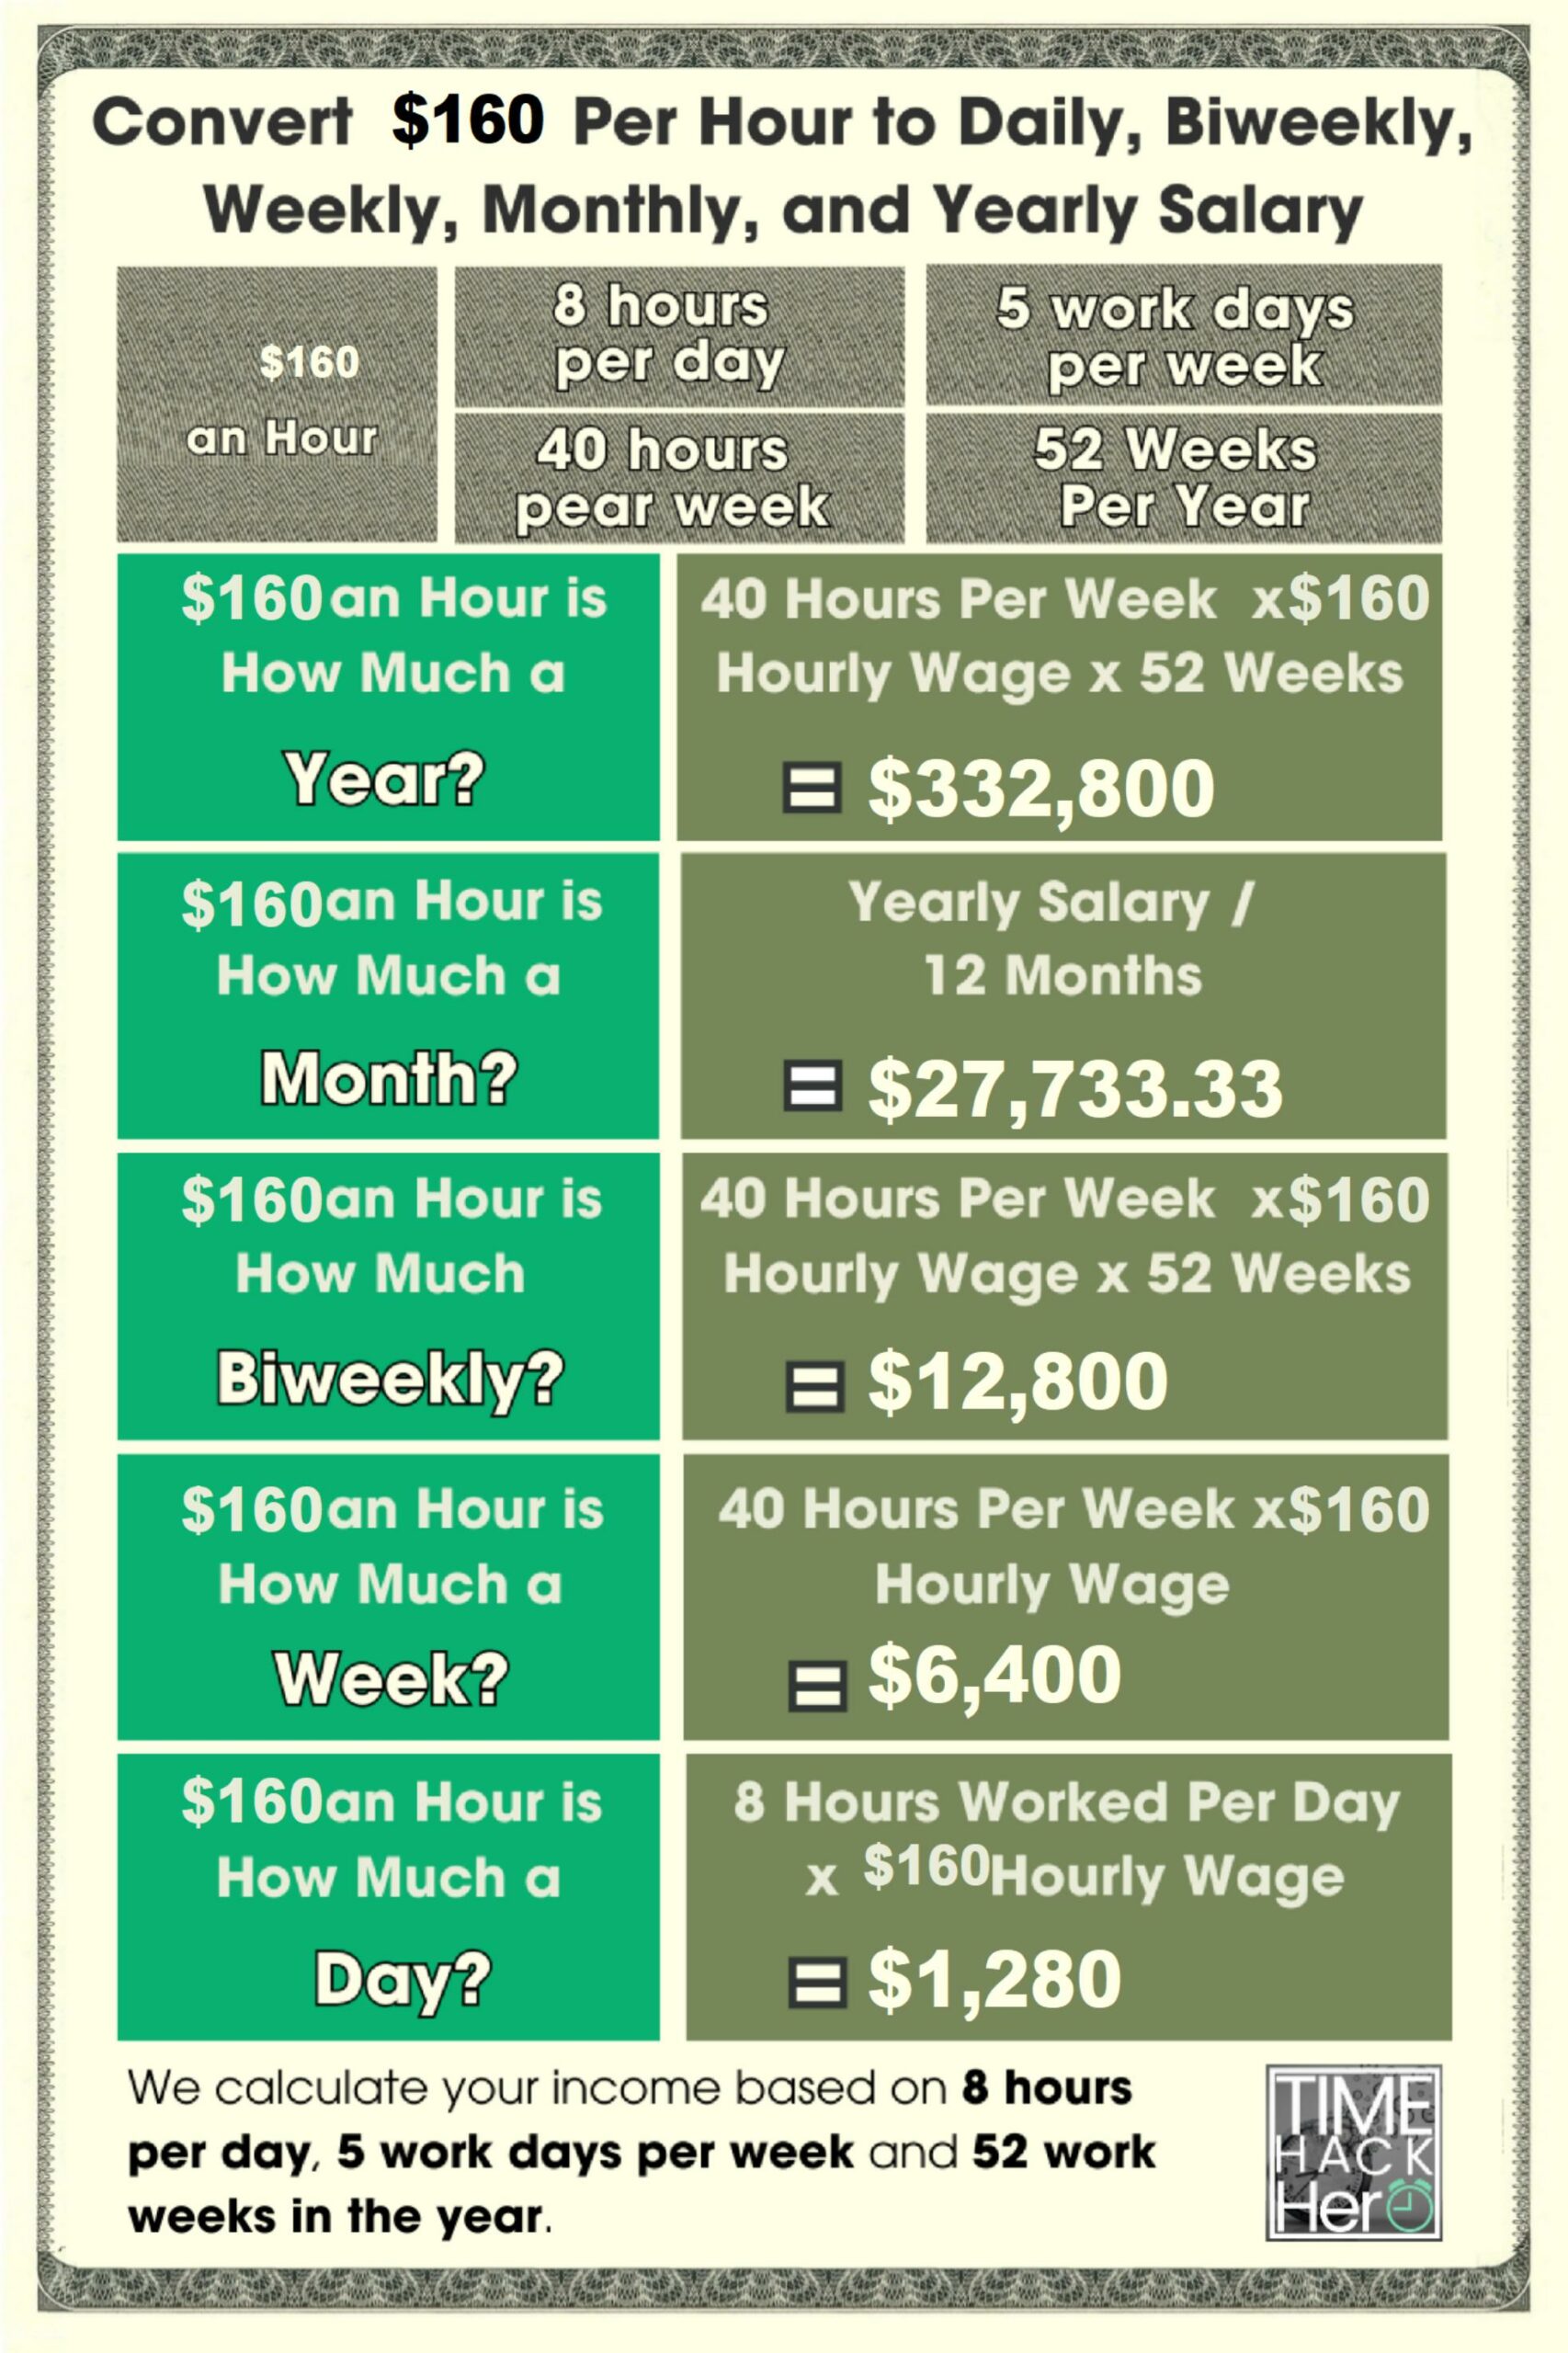 Convert $160 Per Hour to Weekly, Monthly, and Yearly Salary